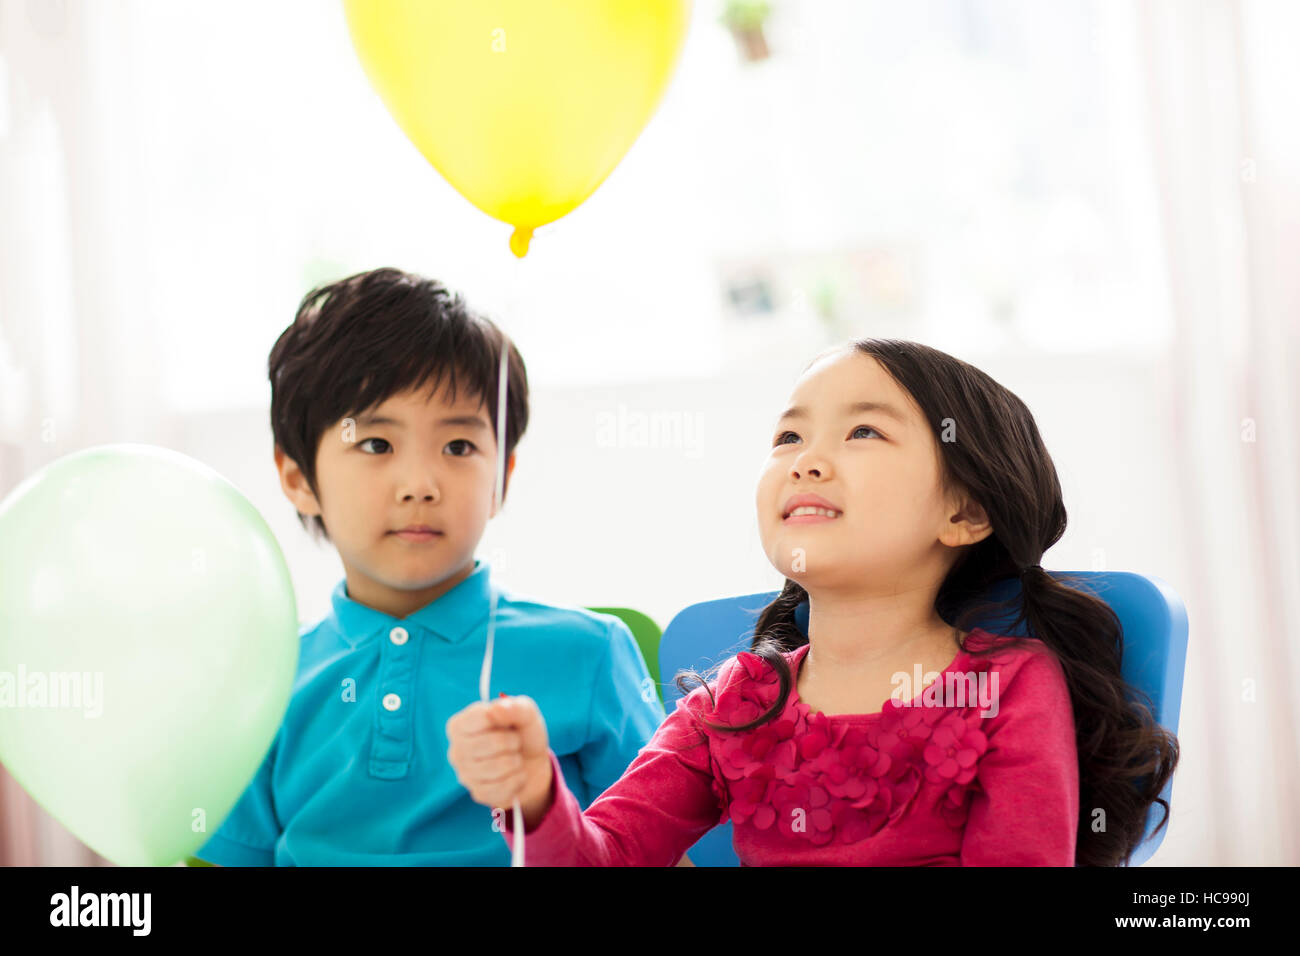 Portrait of smiling boy and girl with a balloon Stock Photo